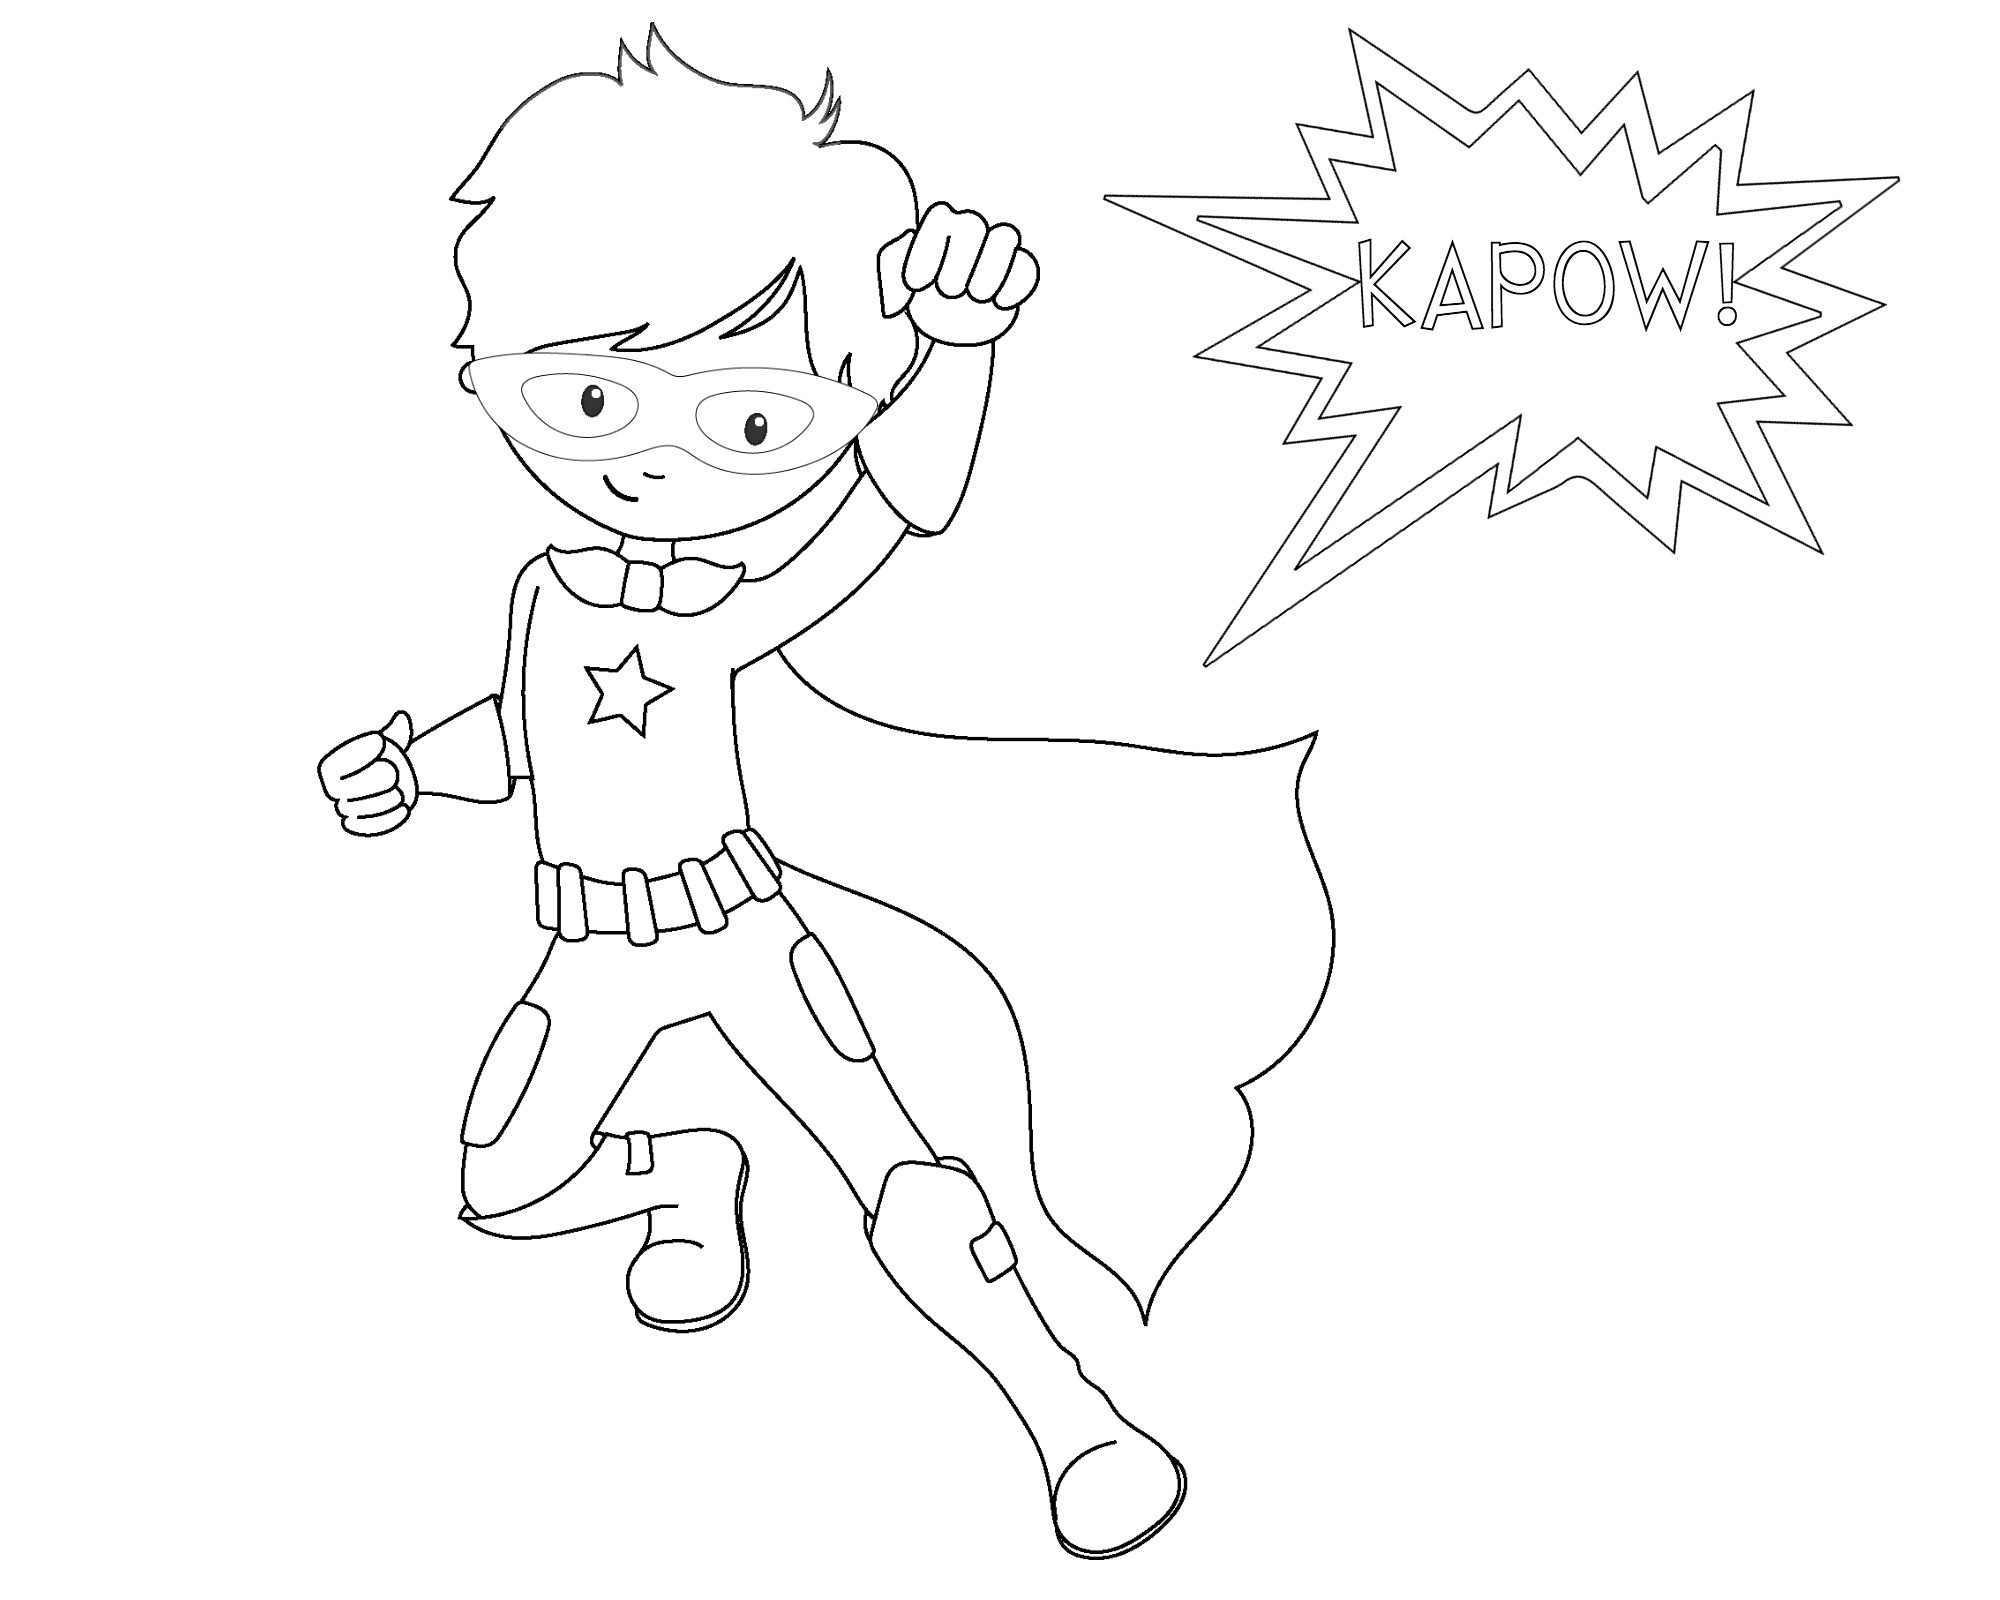 Drawing Easy Superheroes Superheroes Easy to Draw Spiderman Coloring Pages Luxury 0 0d